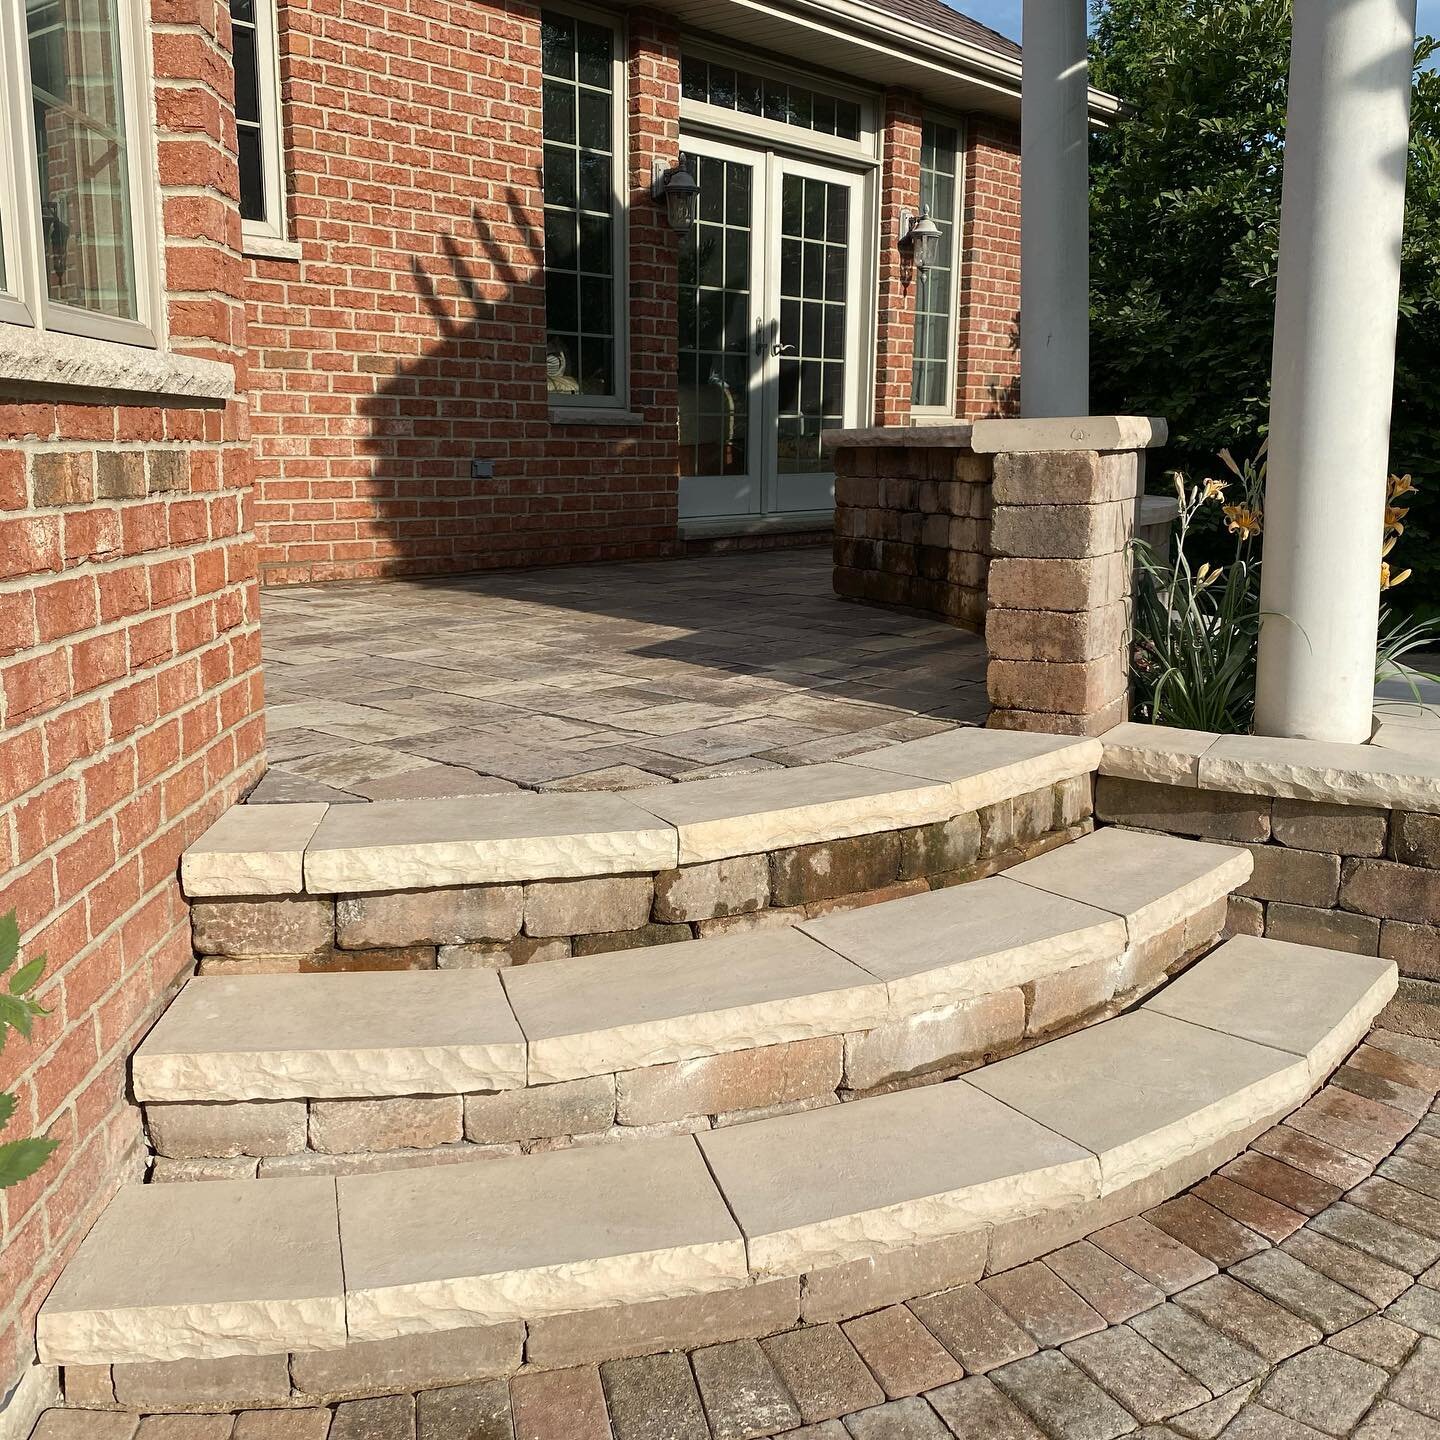 Completed a patio update a few weeks ago with Westport pavers, Olde Quarry retaining wall and Ledgestone caps #unilock #patio #outdoorliving #backyarddesign